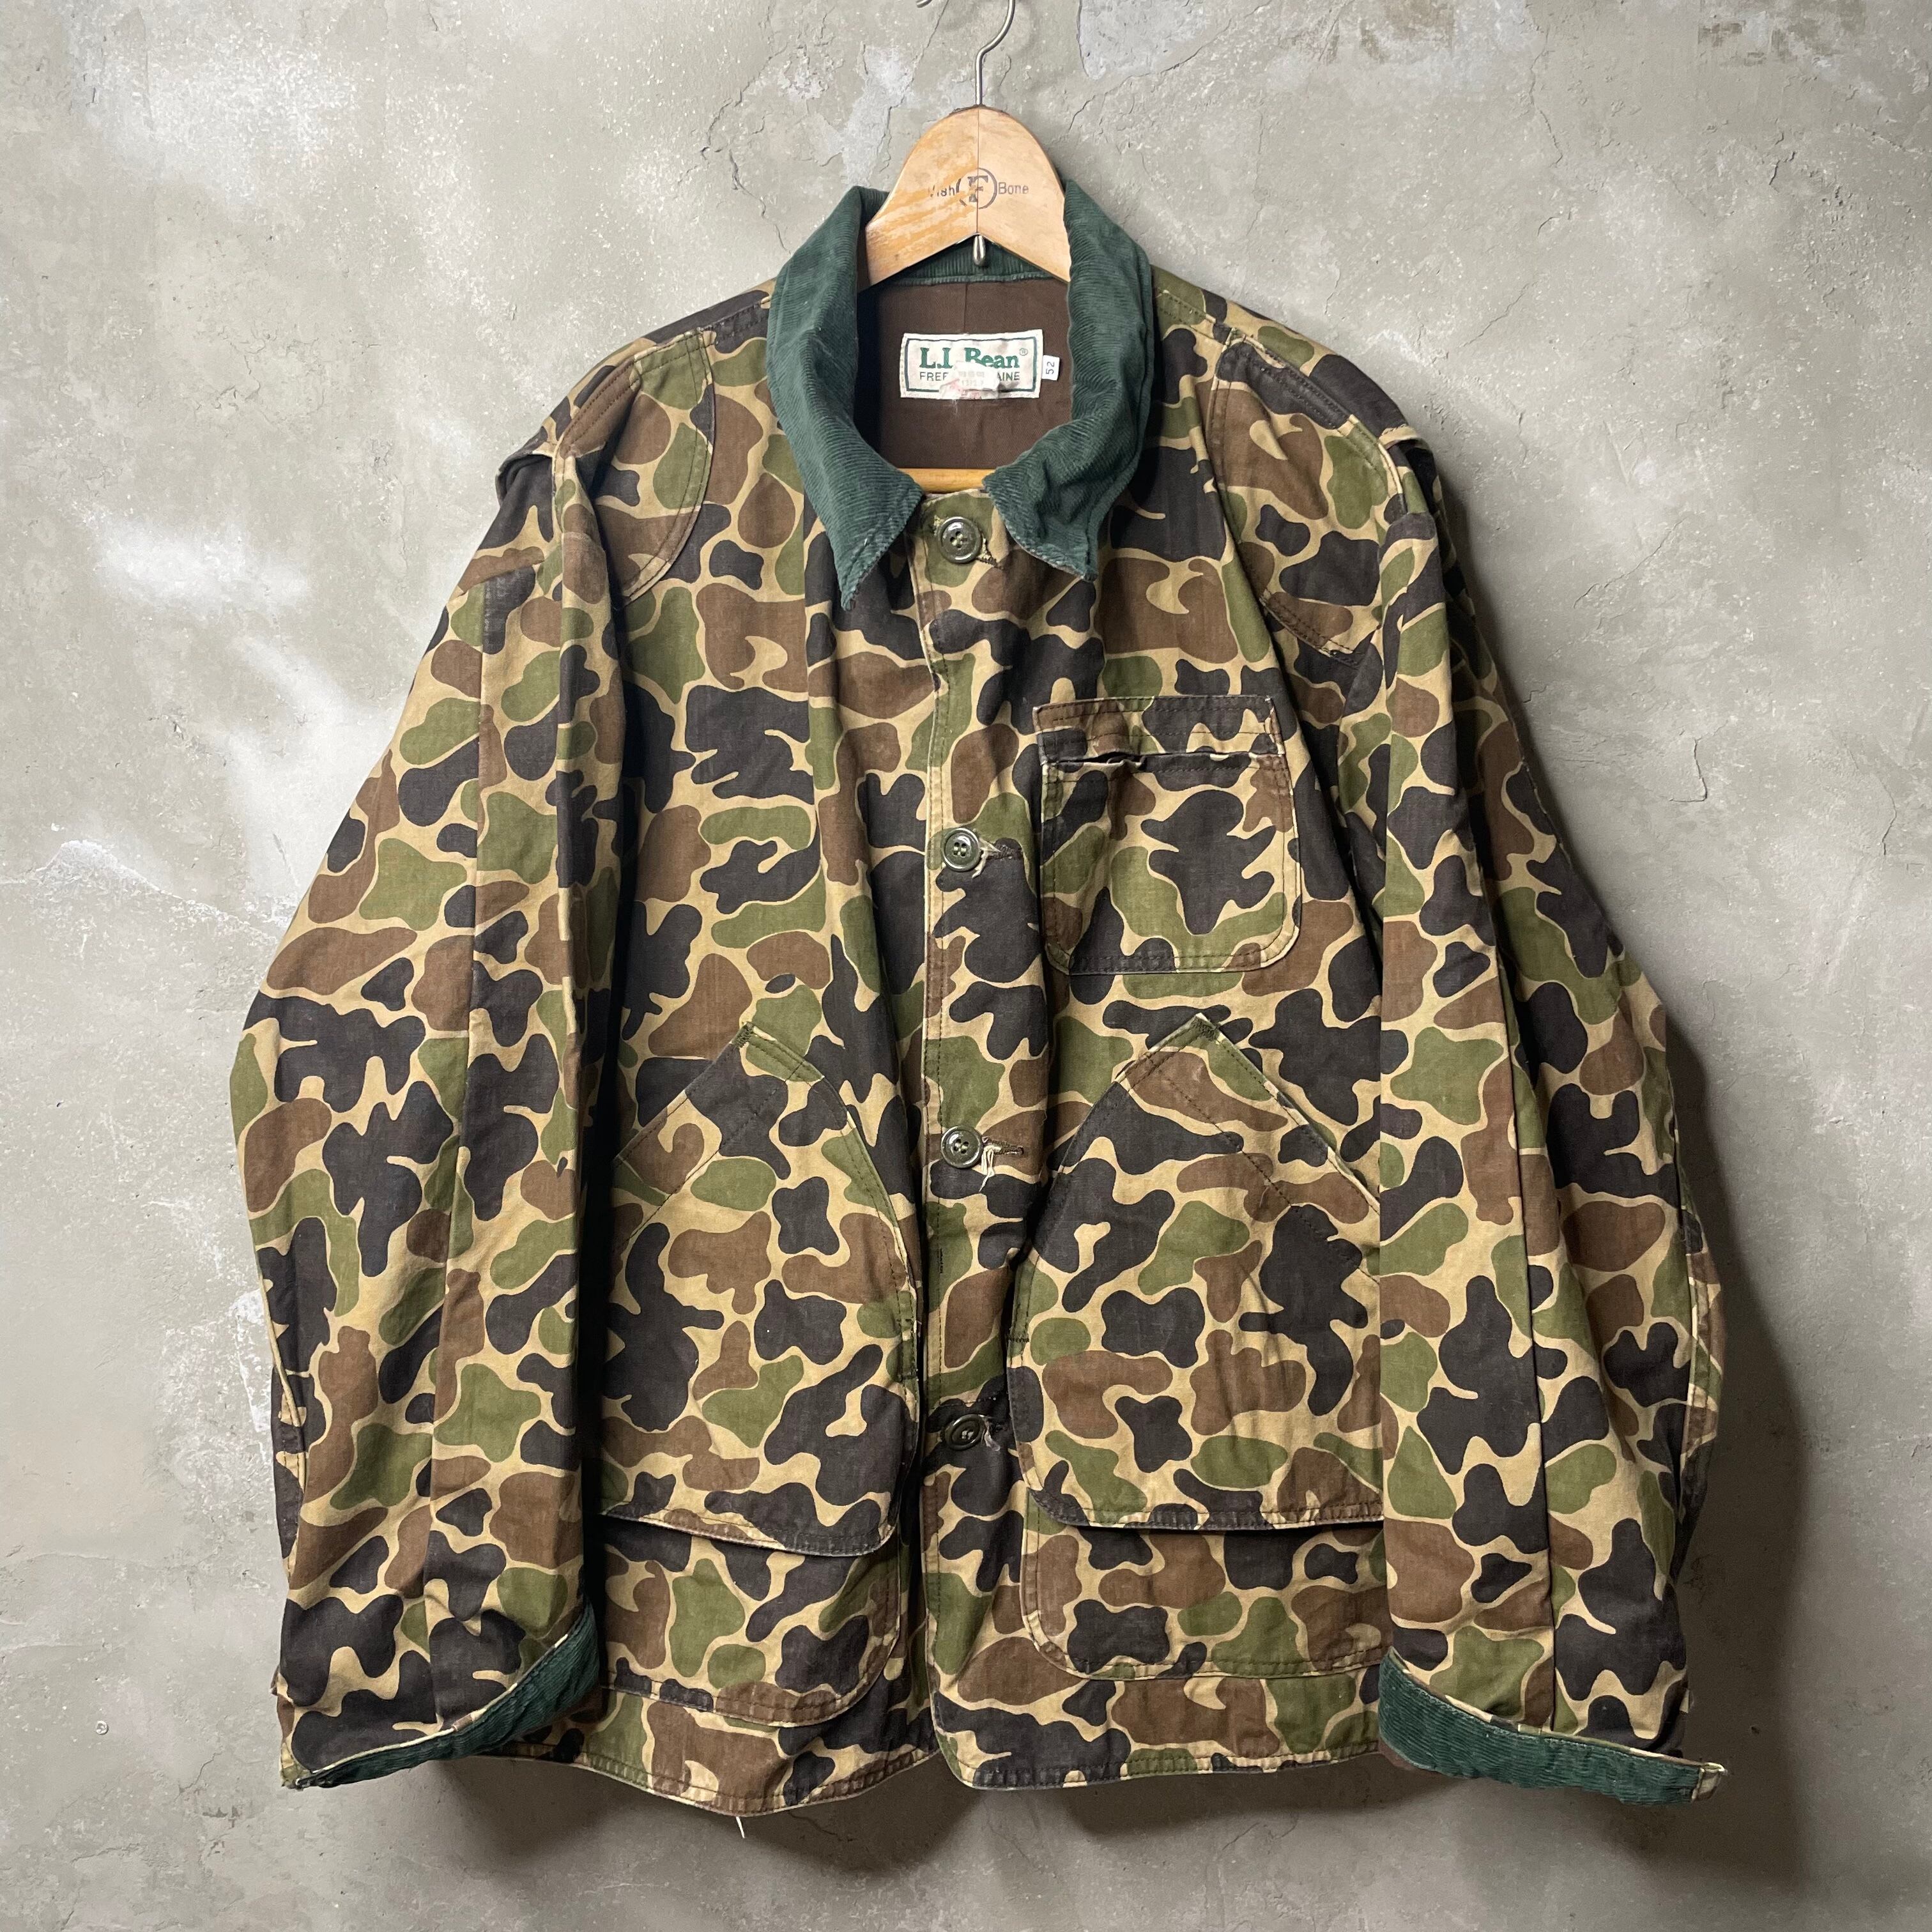 80s L.L.Bean】camouflage hunting jacket エルエルビーン アメリカ製 ...